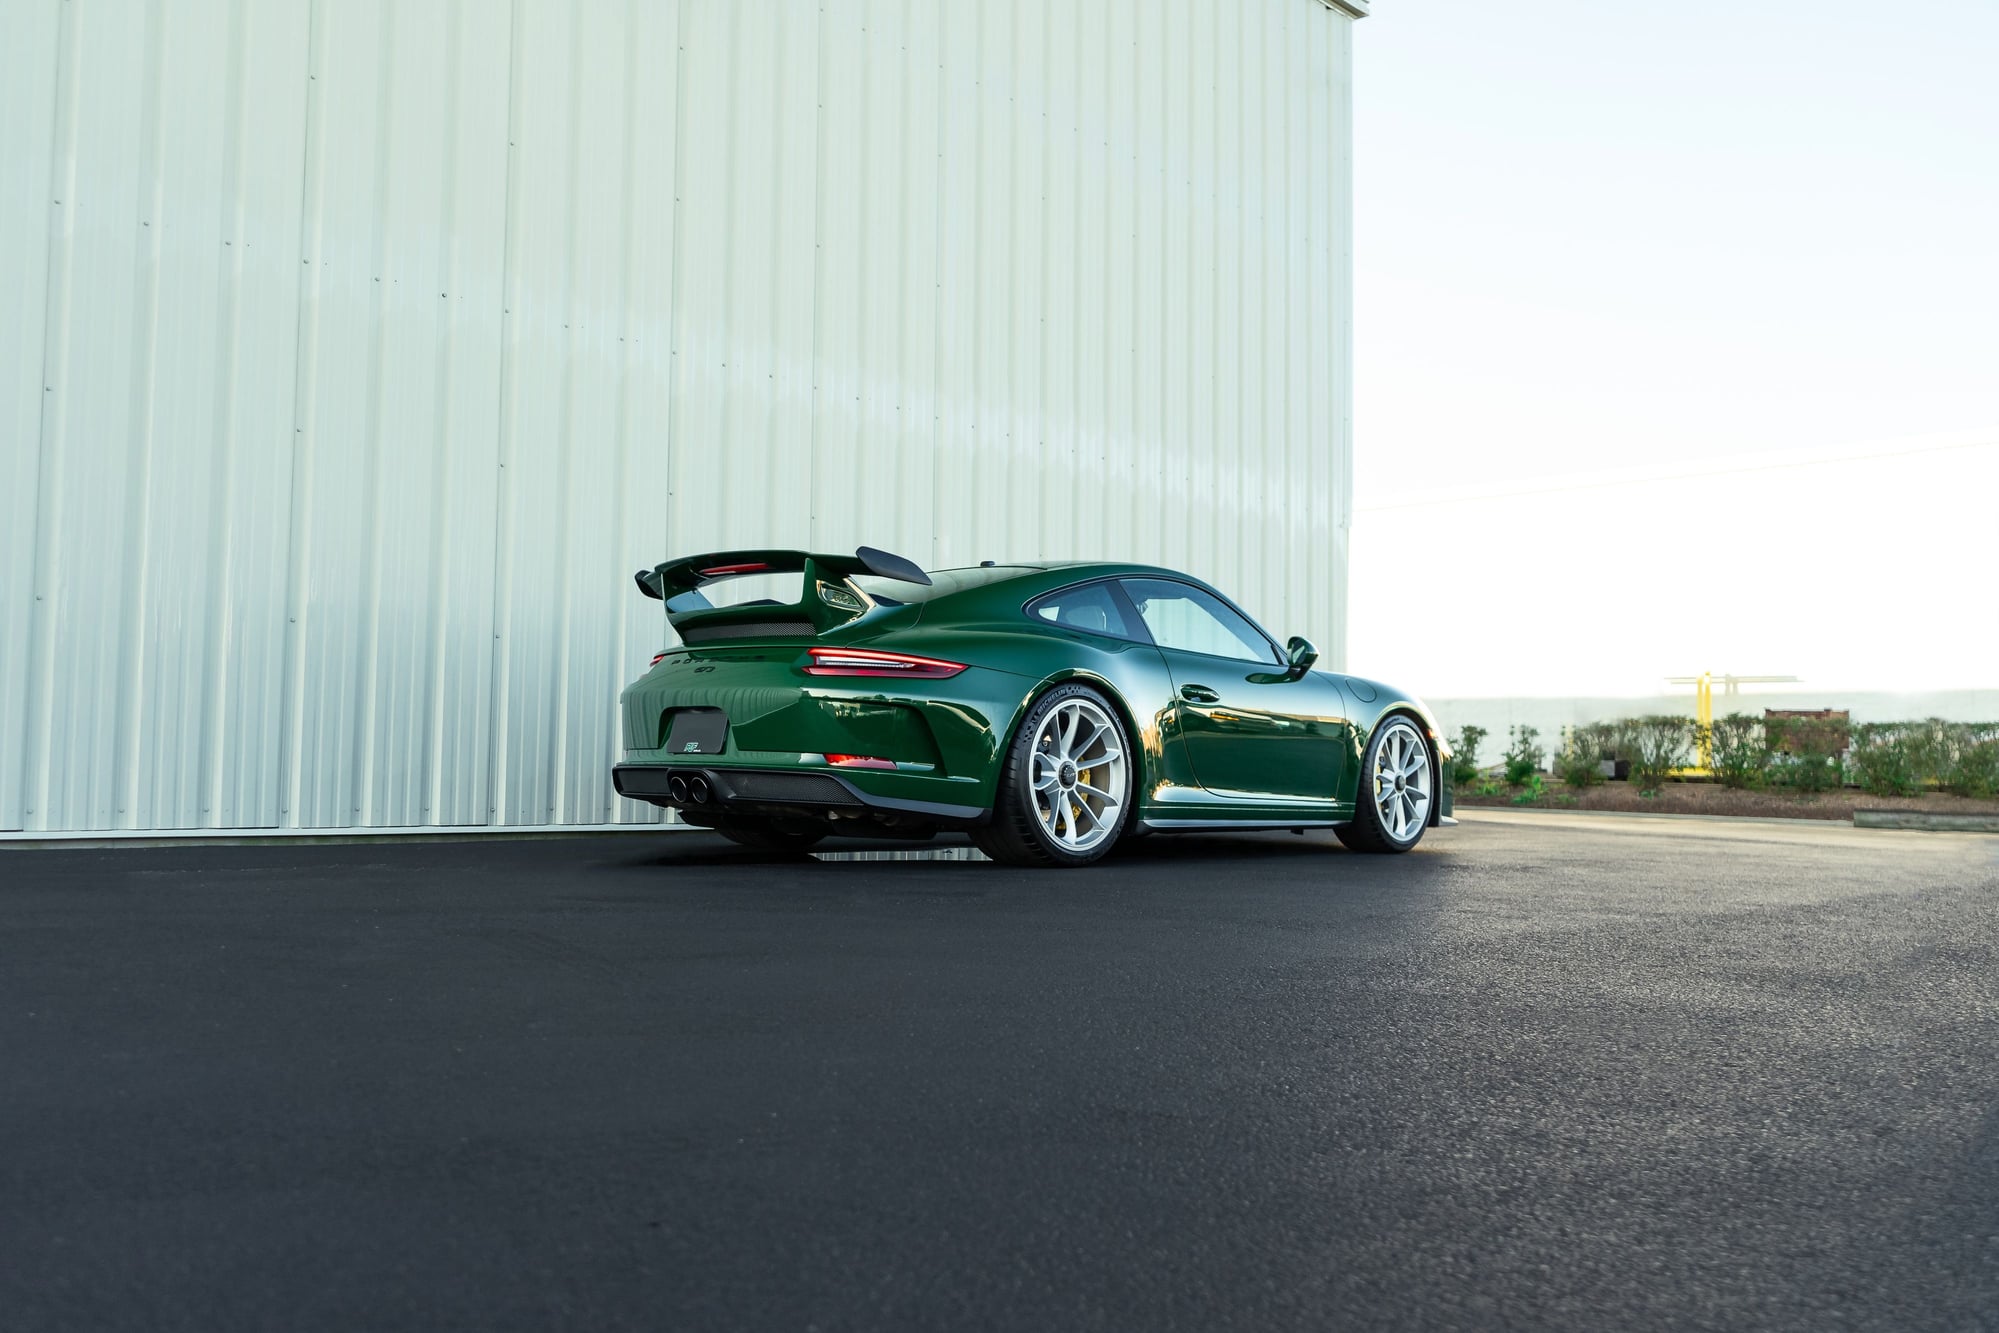 2018 Porsche GT3 - 2018 911 GT3 PTS Irish Green with CXX. 195k MSRP. - Used - VIN WP0AC2A99JS176362 - 6,600 Miles - Manual - Palos Heights, IL 60463, United States